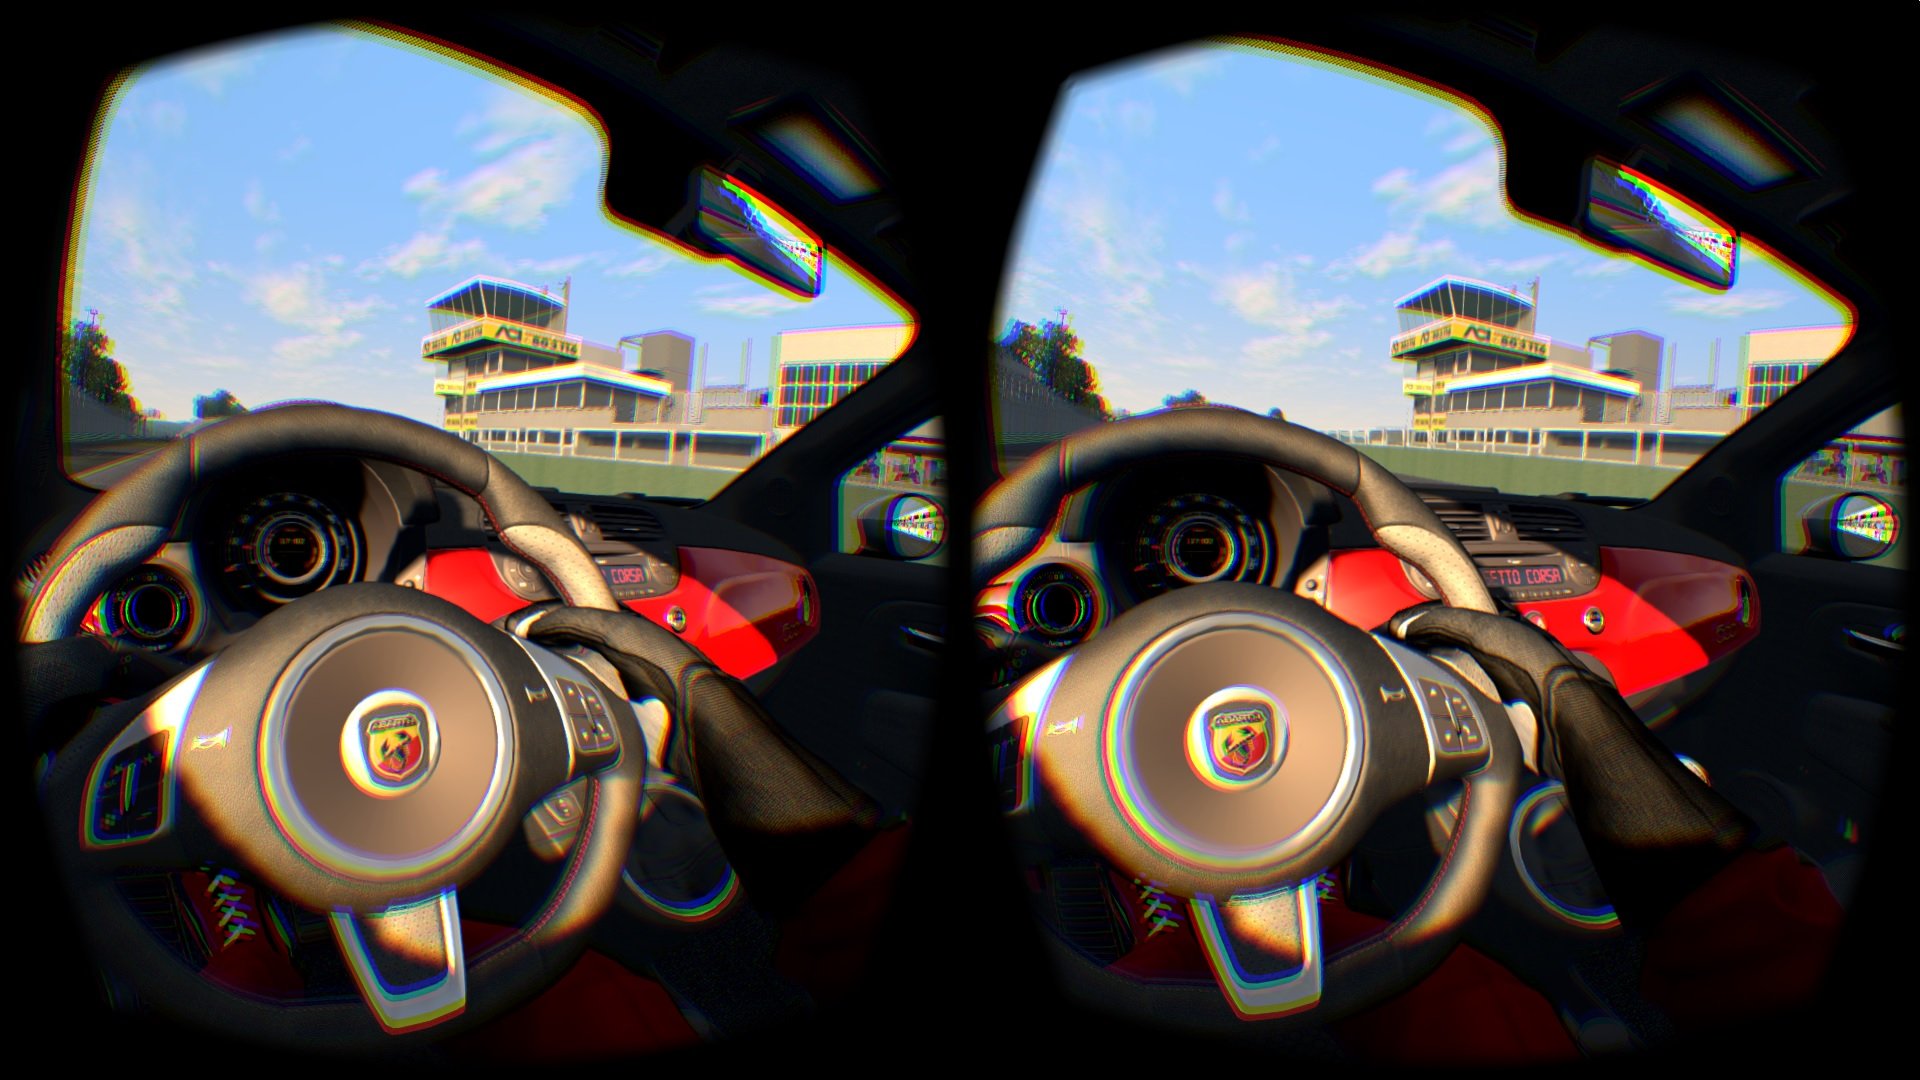 More information about "I racing games per la Virtual Reality"